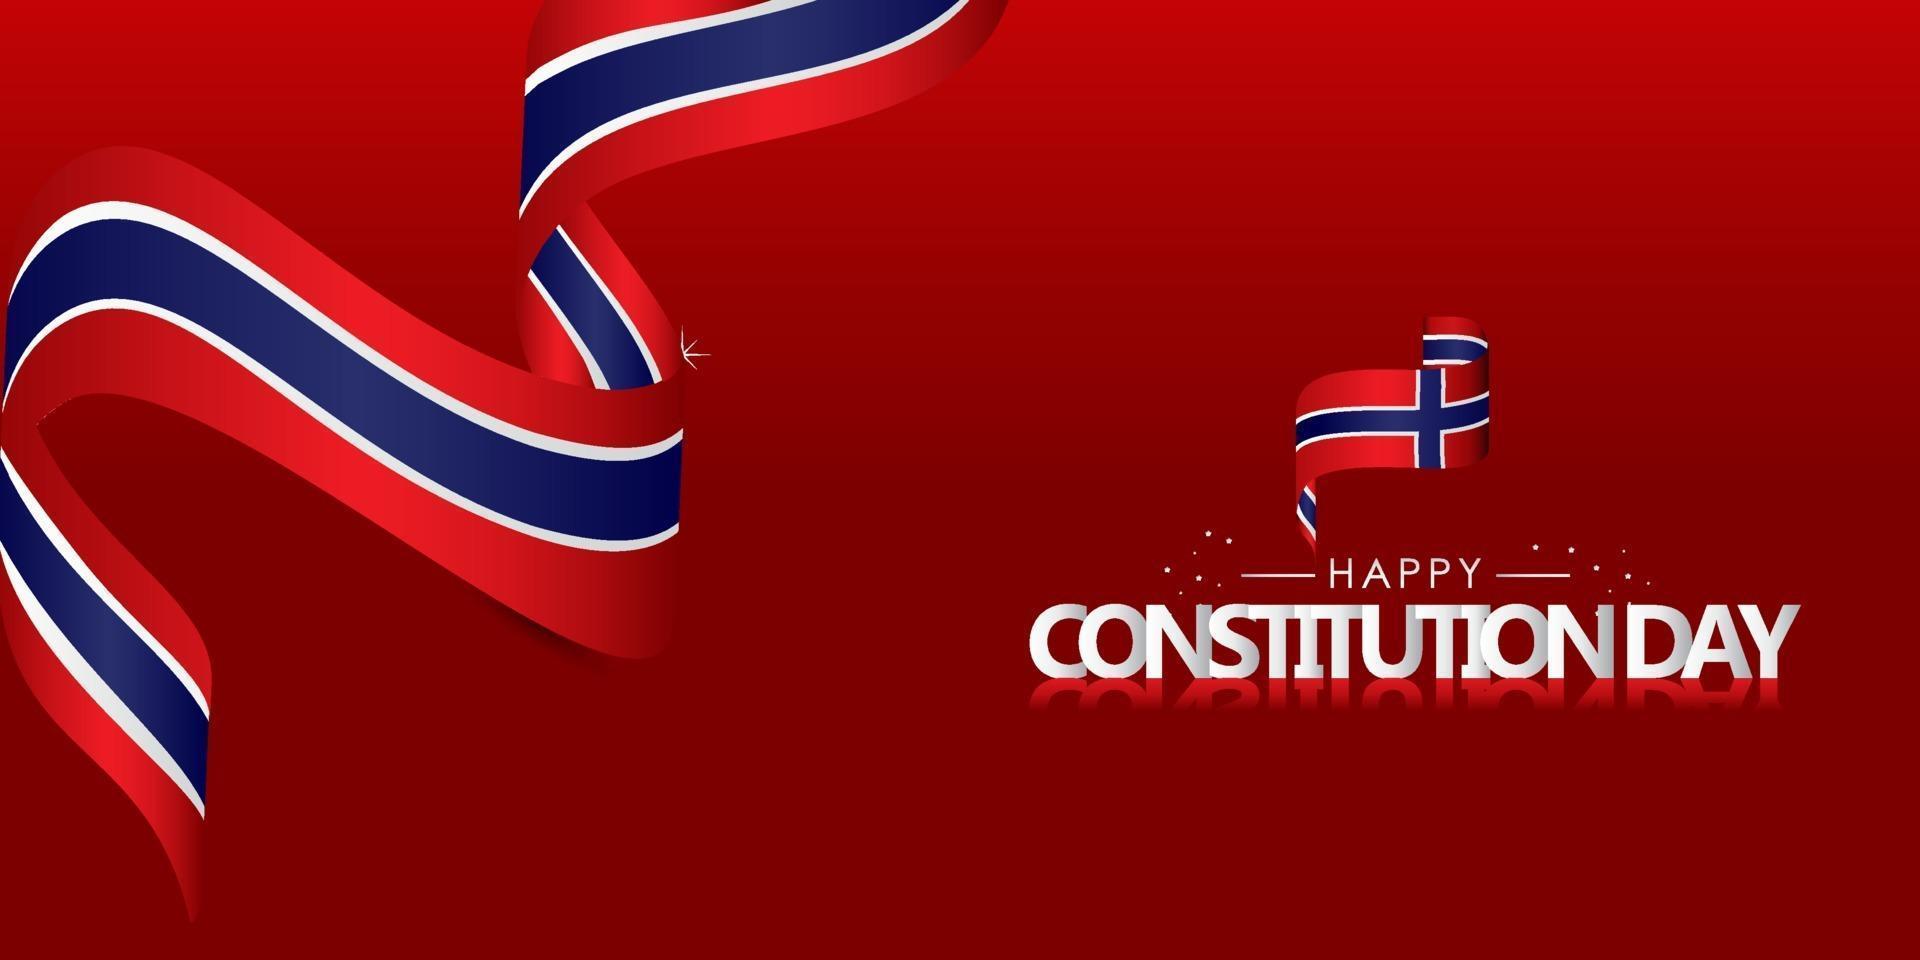 Norway Constitution Day Greeting Design Celebrate vector